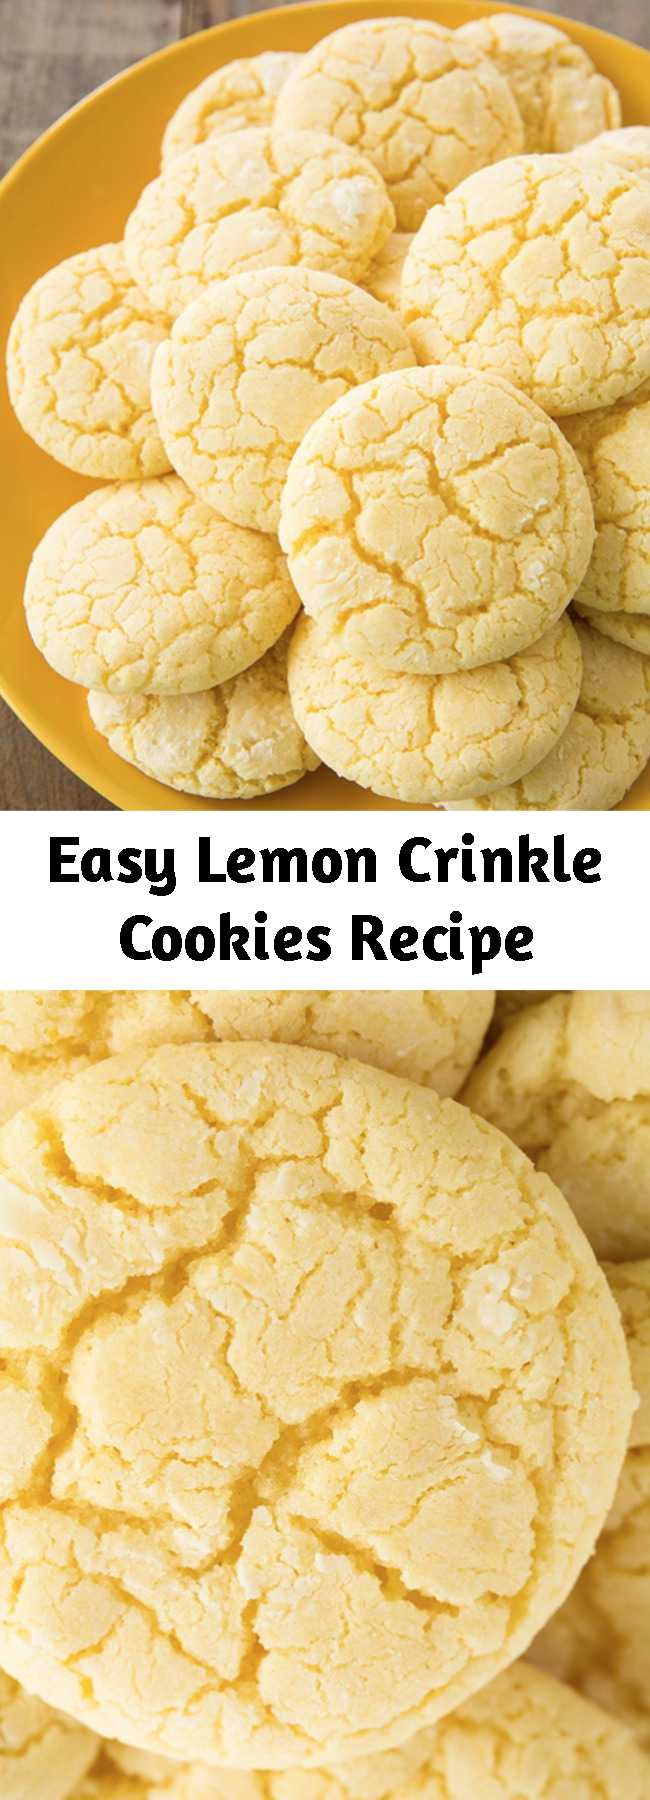 Easy Lemon Crinkle Cookies Recipe - These lemon crinkle crinkle cookies are the perfect dessert in the summer, but they also make the perfect holiday cookie in the winter. They’re brimming with lemon flavor and have a delicious, soft texture. They just melt in your mouth when they are warm out of the oven. Plus, they take less than 25 minutes to prepare!